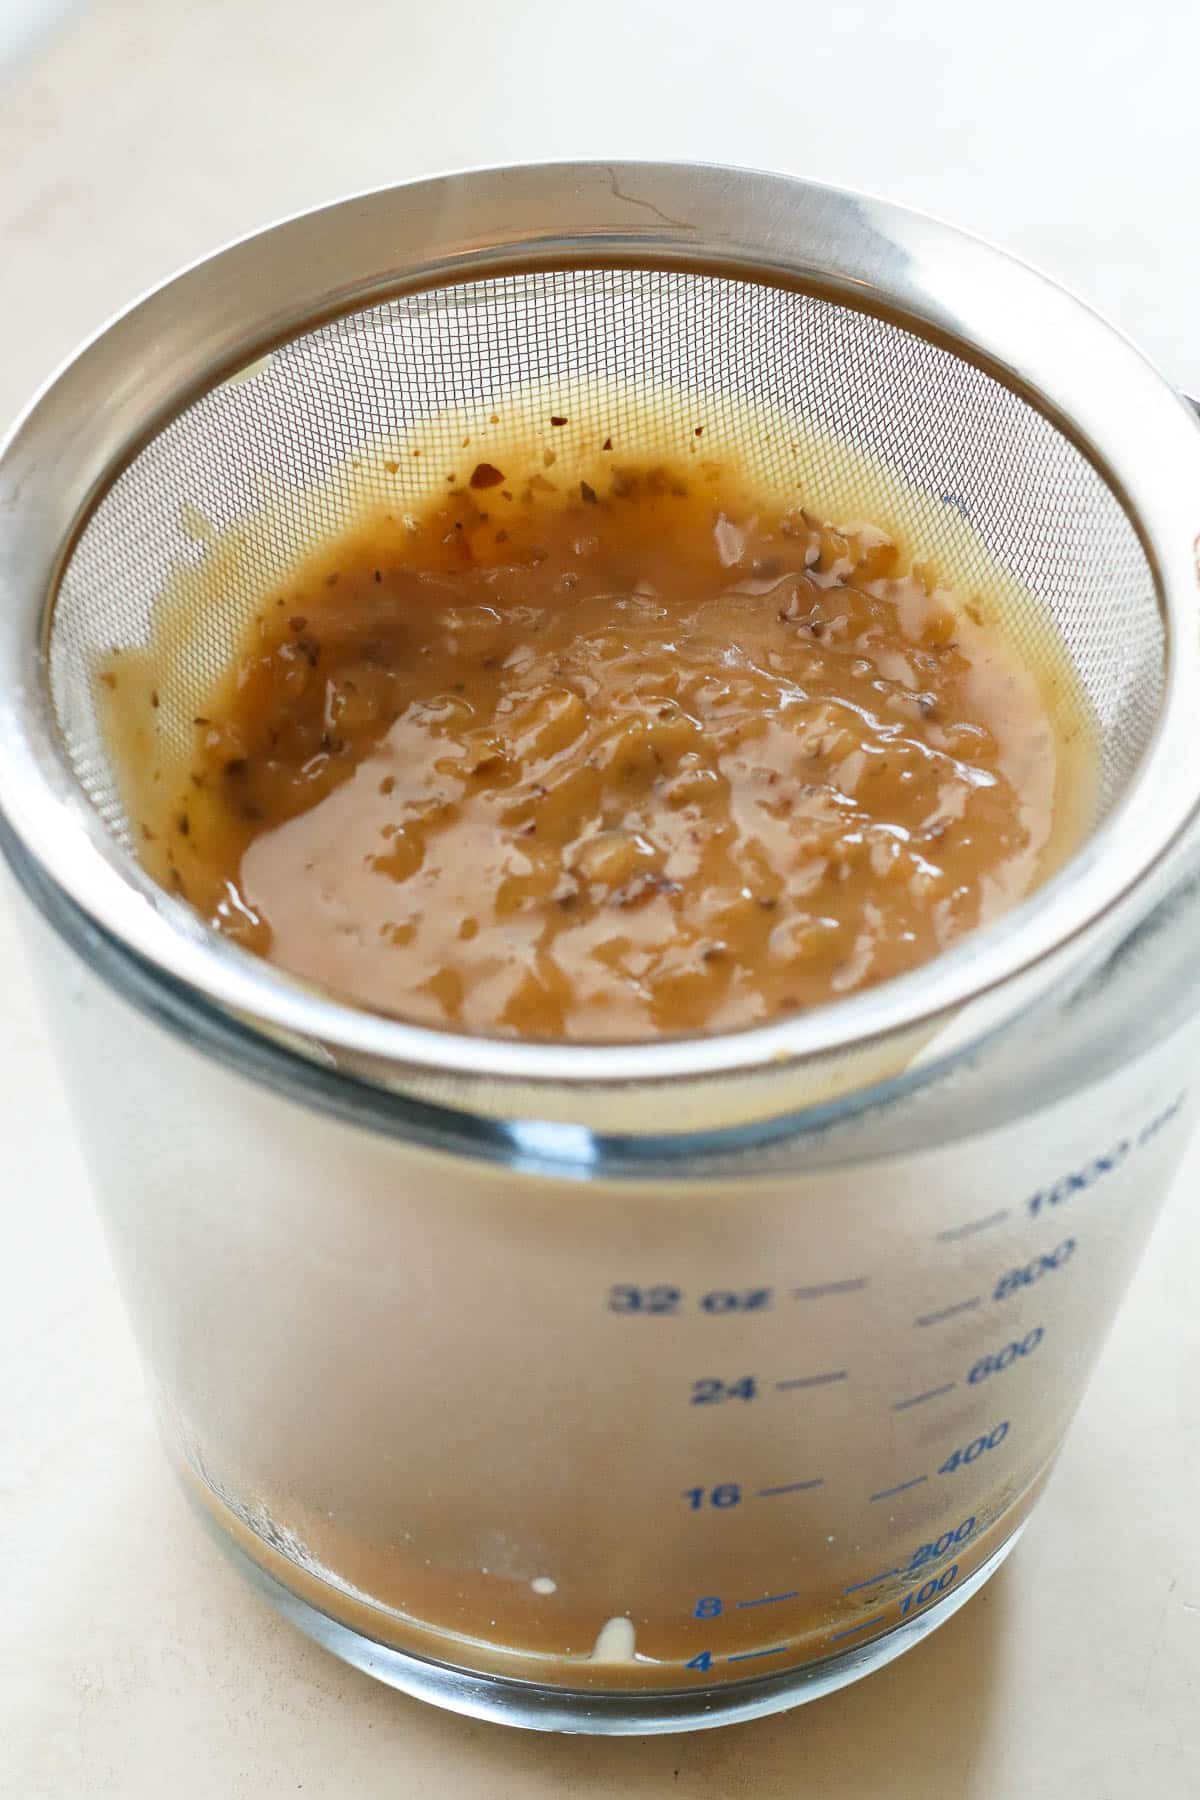 gravy straining over measuring cup.